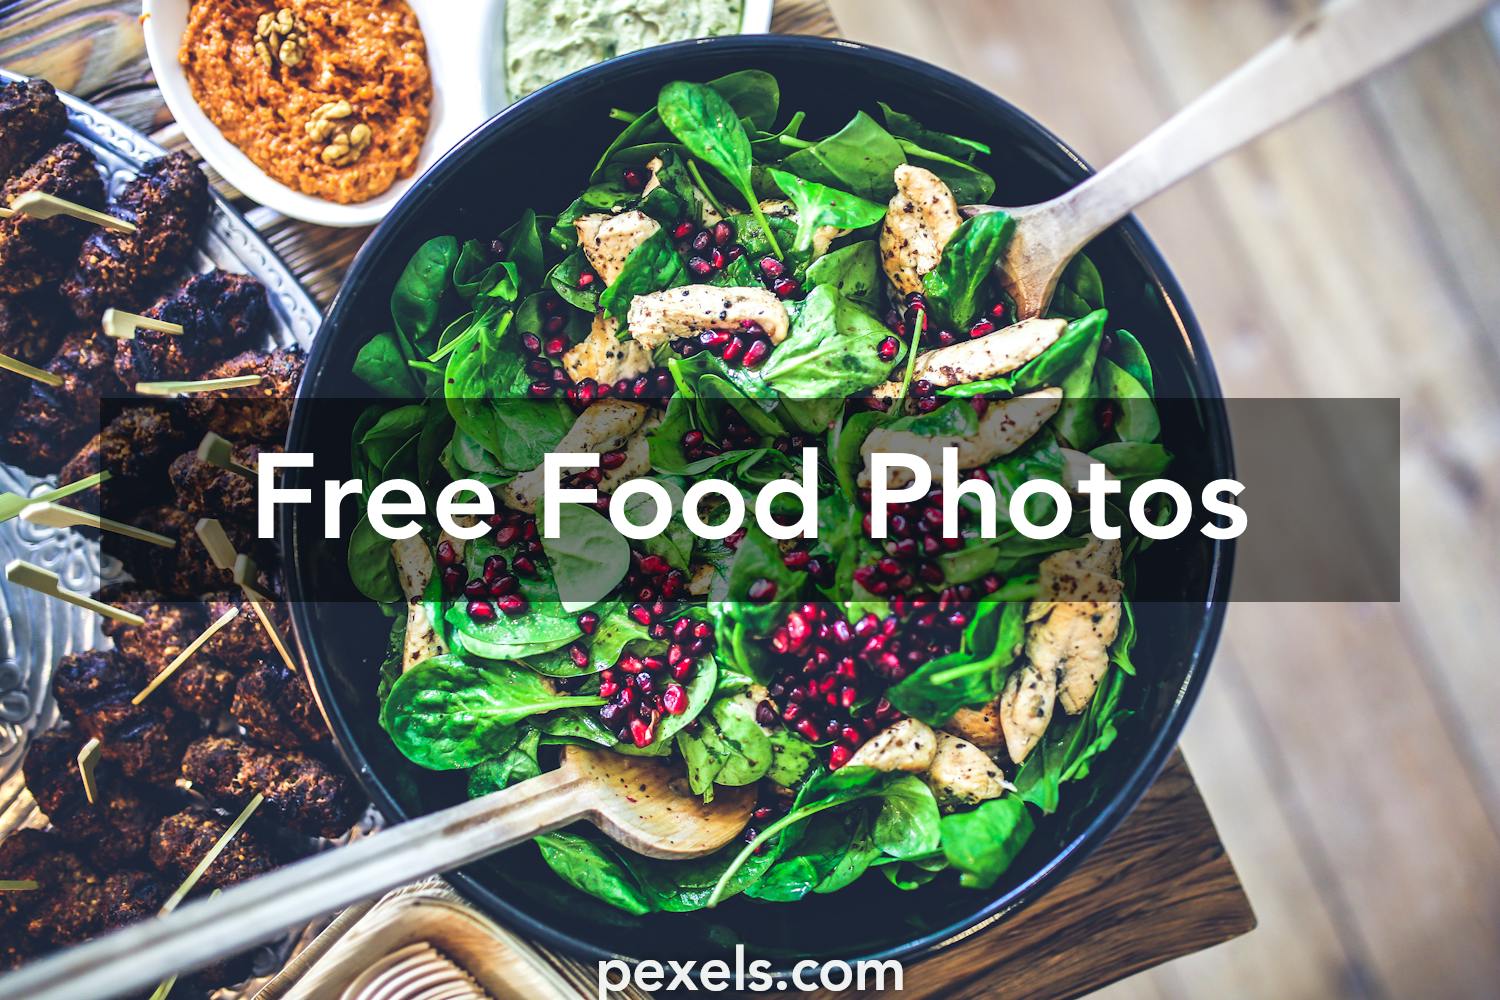 Food Photography Stock Images Free Food Stock Images Yum Yum I